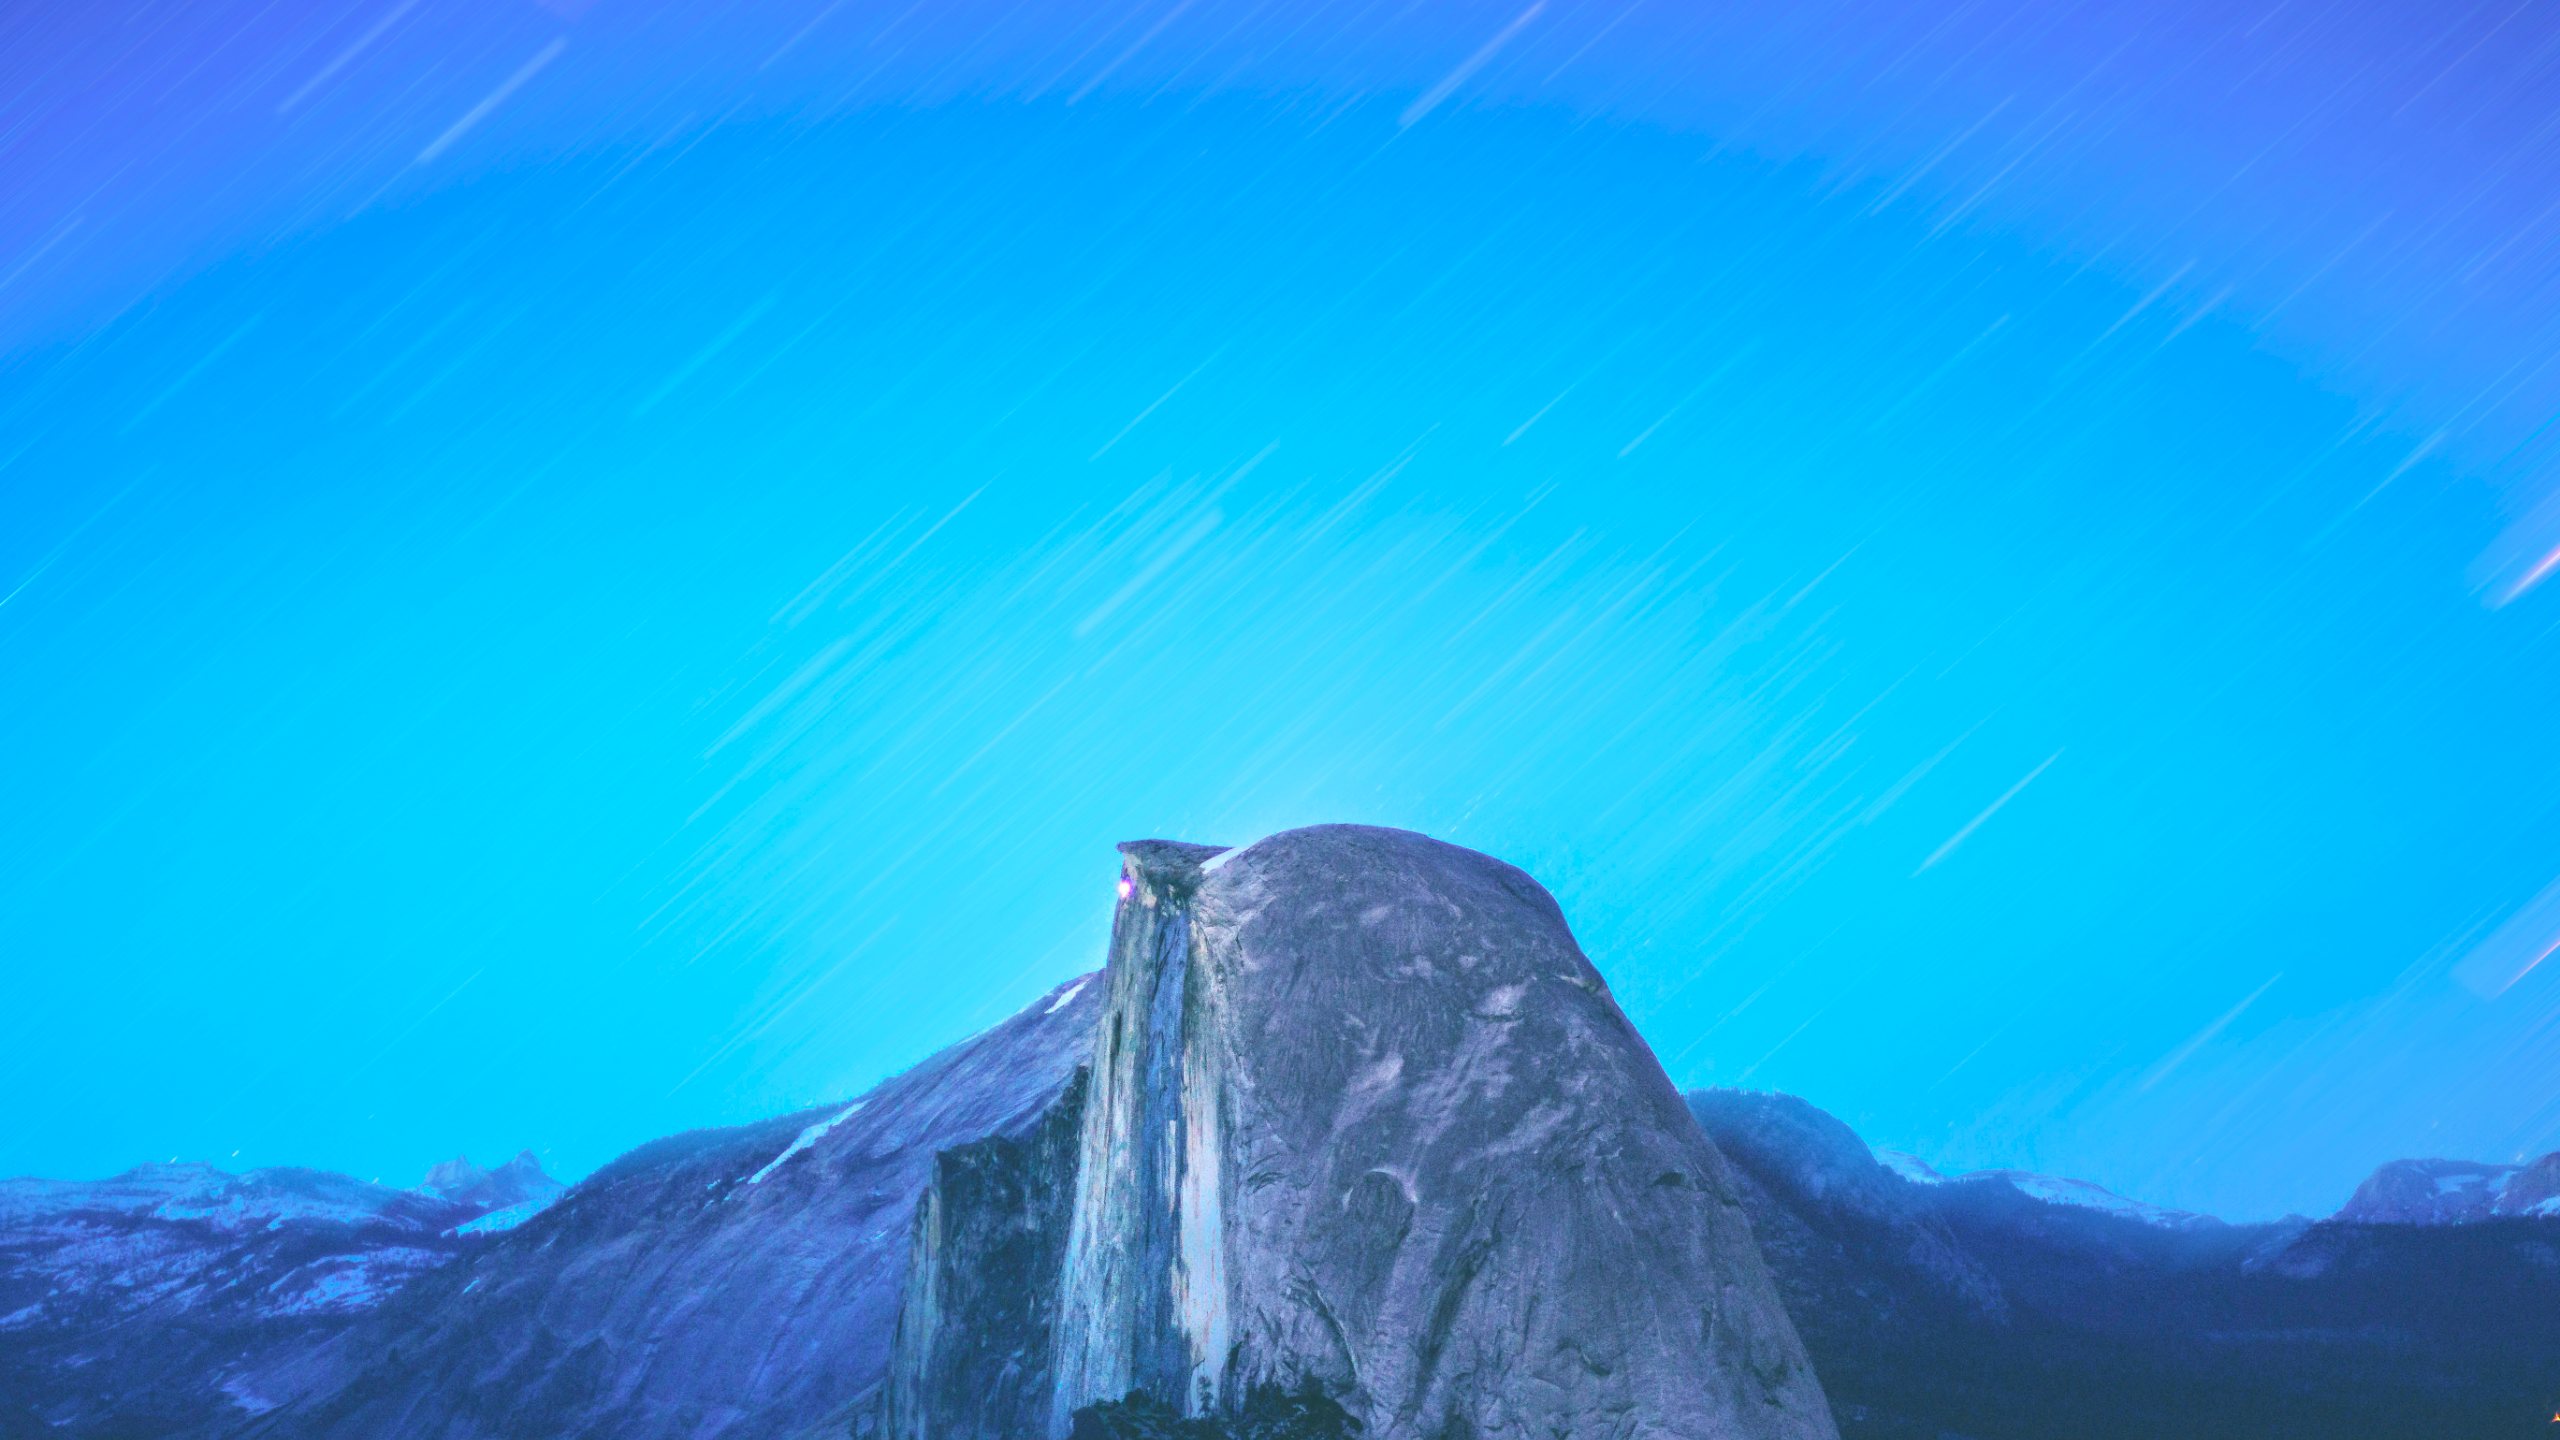 Nature Landscape Mountains Cliff Night Forest Yosemite National Park USA Long Exposure 2560x1440